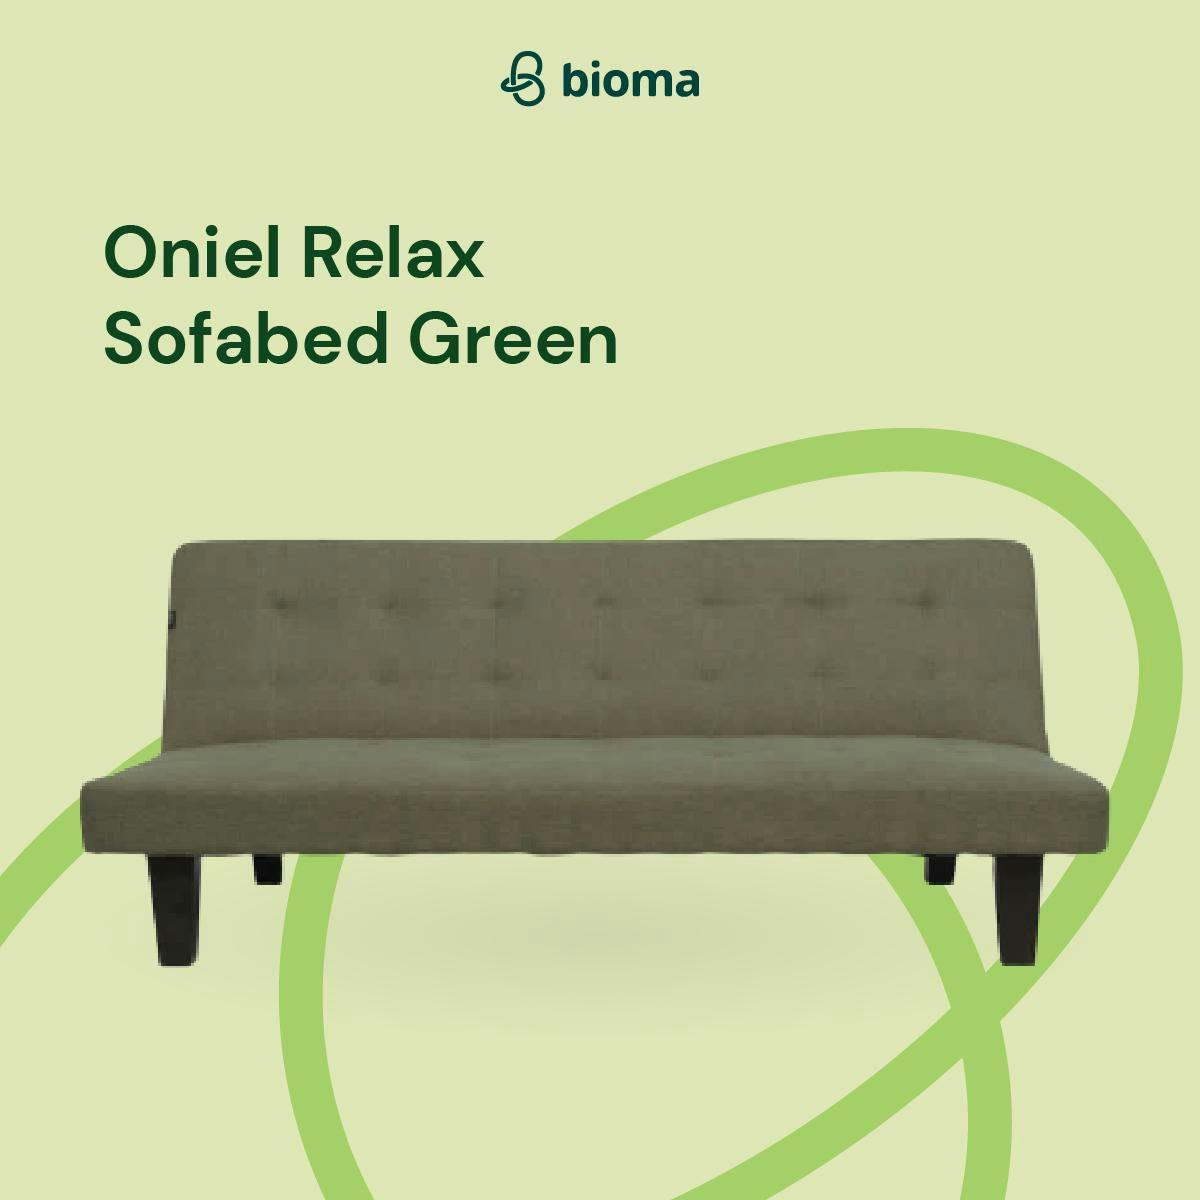 Image 364 Oniel Relax Sofabed